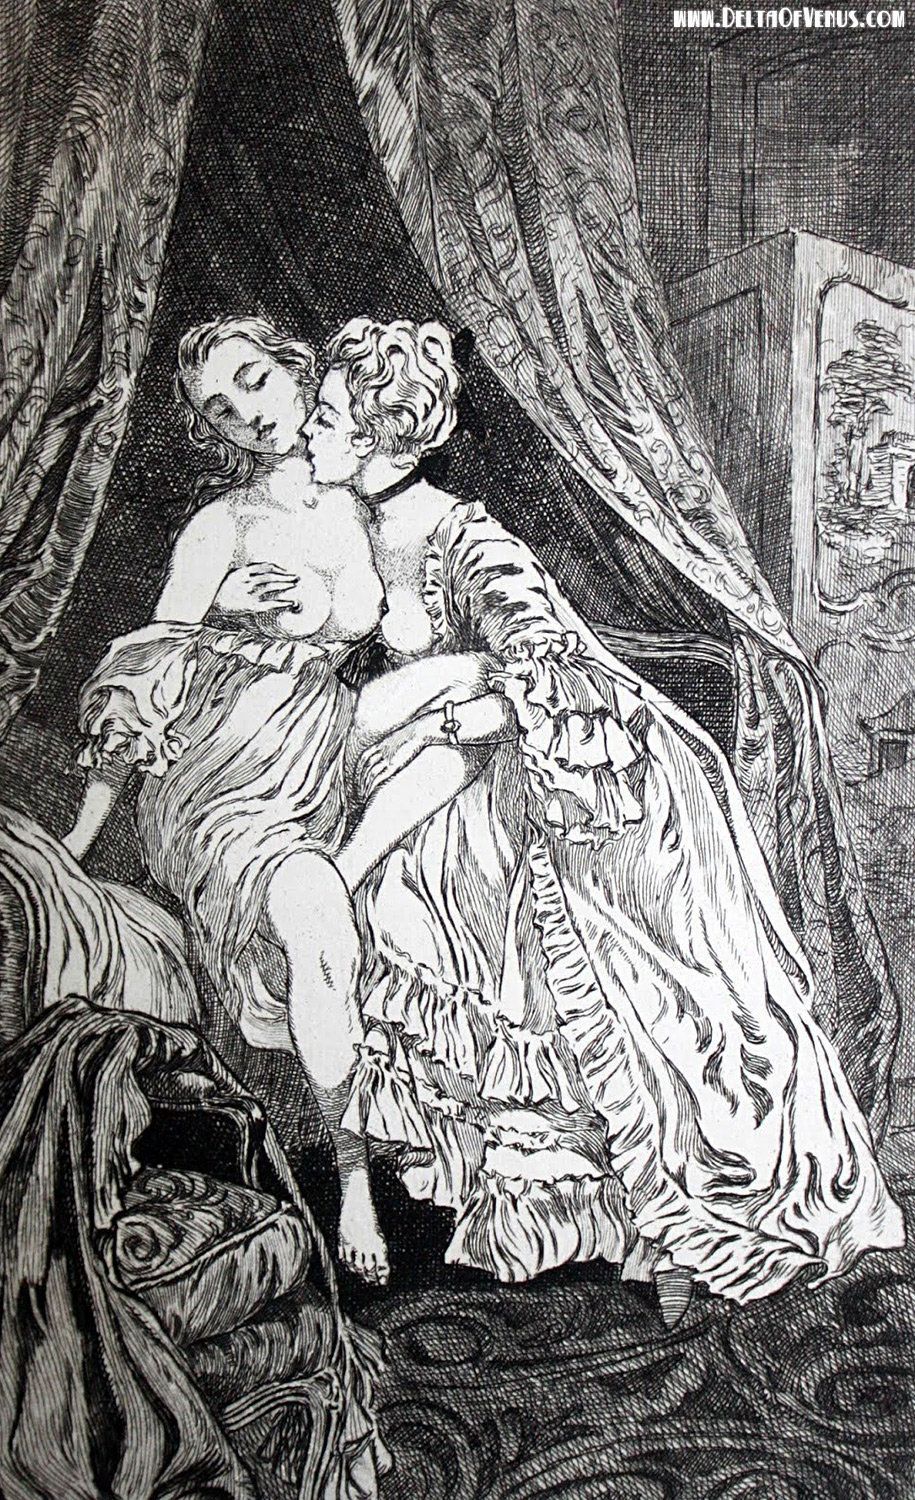 19th Century Porn Illustrations - Dive Into The Fantasies Of An Obscure 19th Century Erotic Illustrator  (NSFW) | HuffPost Entertainment